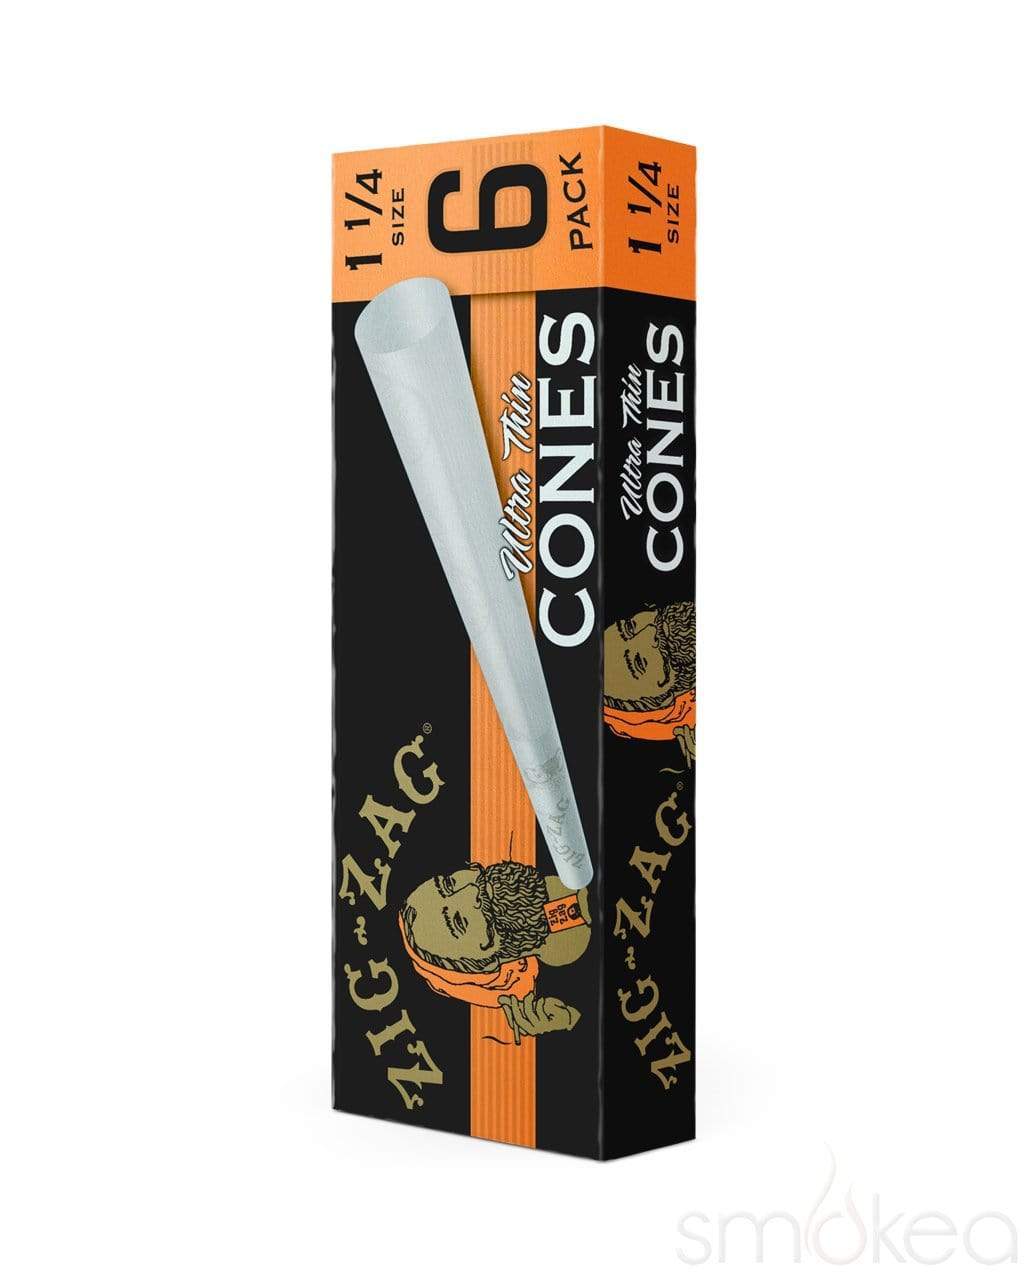 Zig Zag 1 1/4 Pre-Rolled Cones (6-Pack)